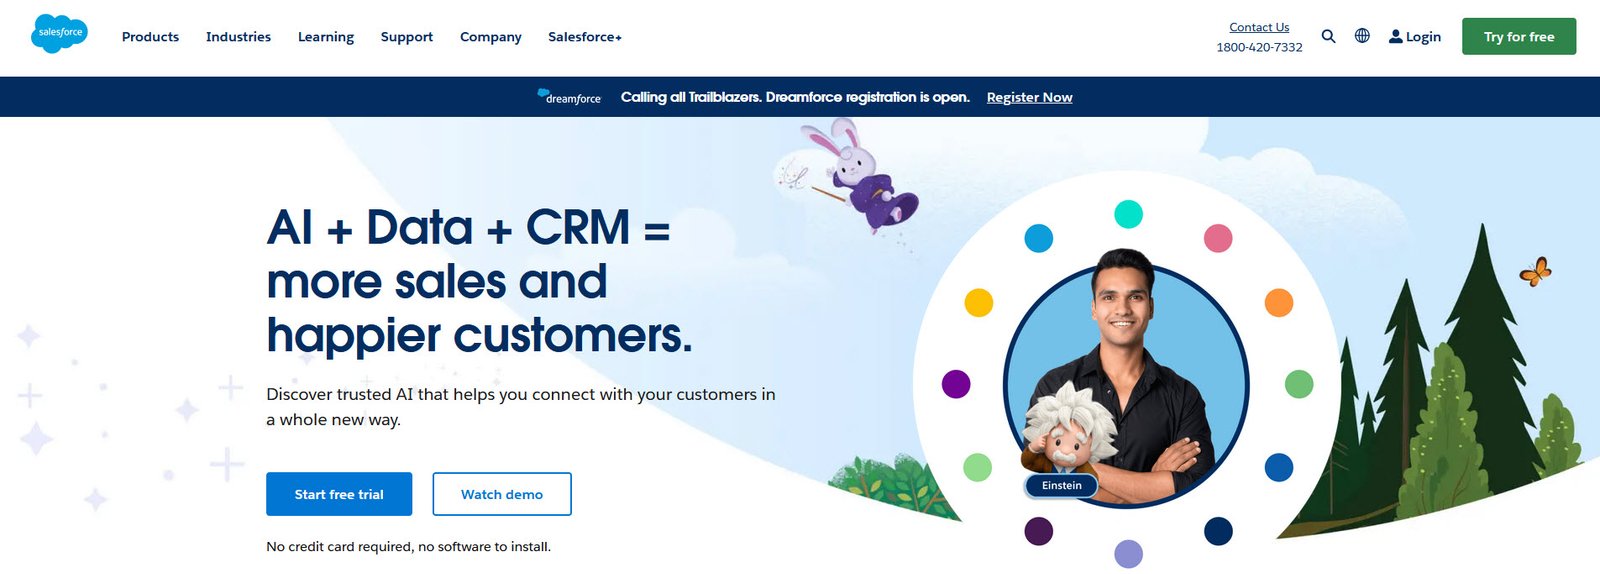 Salesforce CRM Tool Topattop